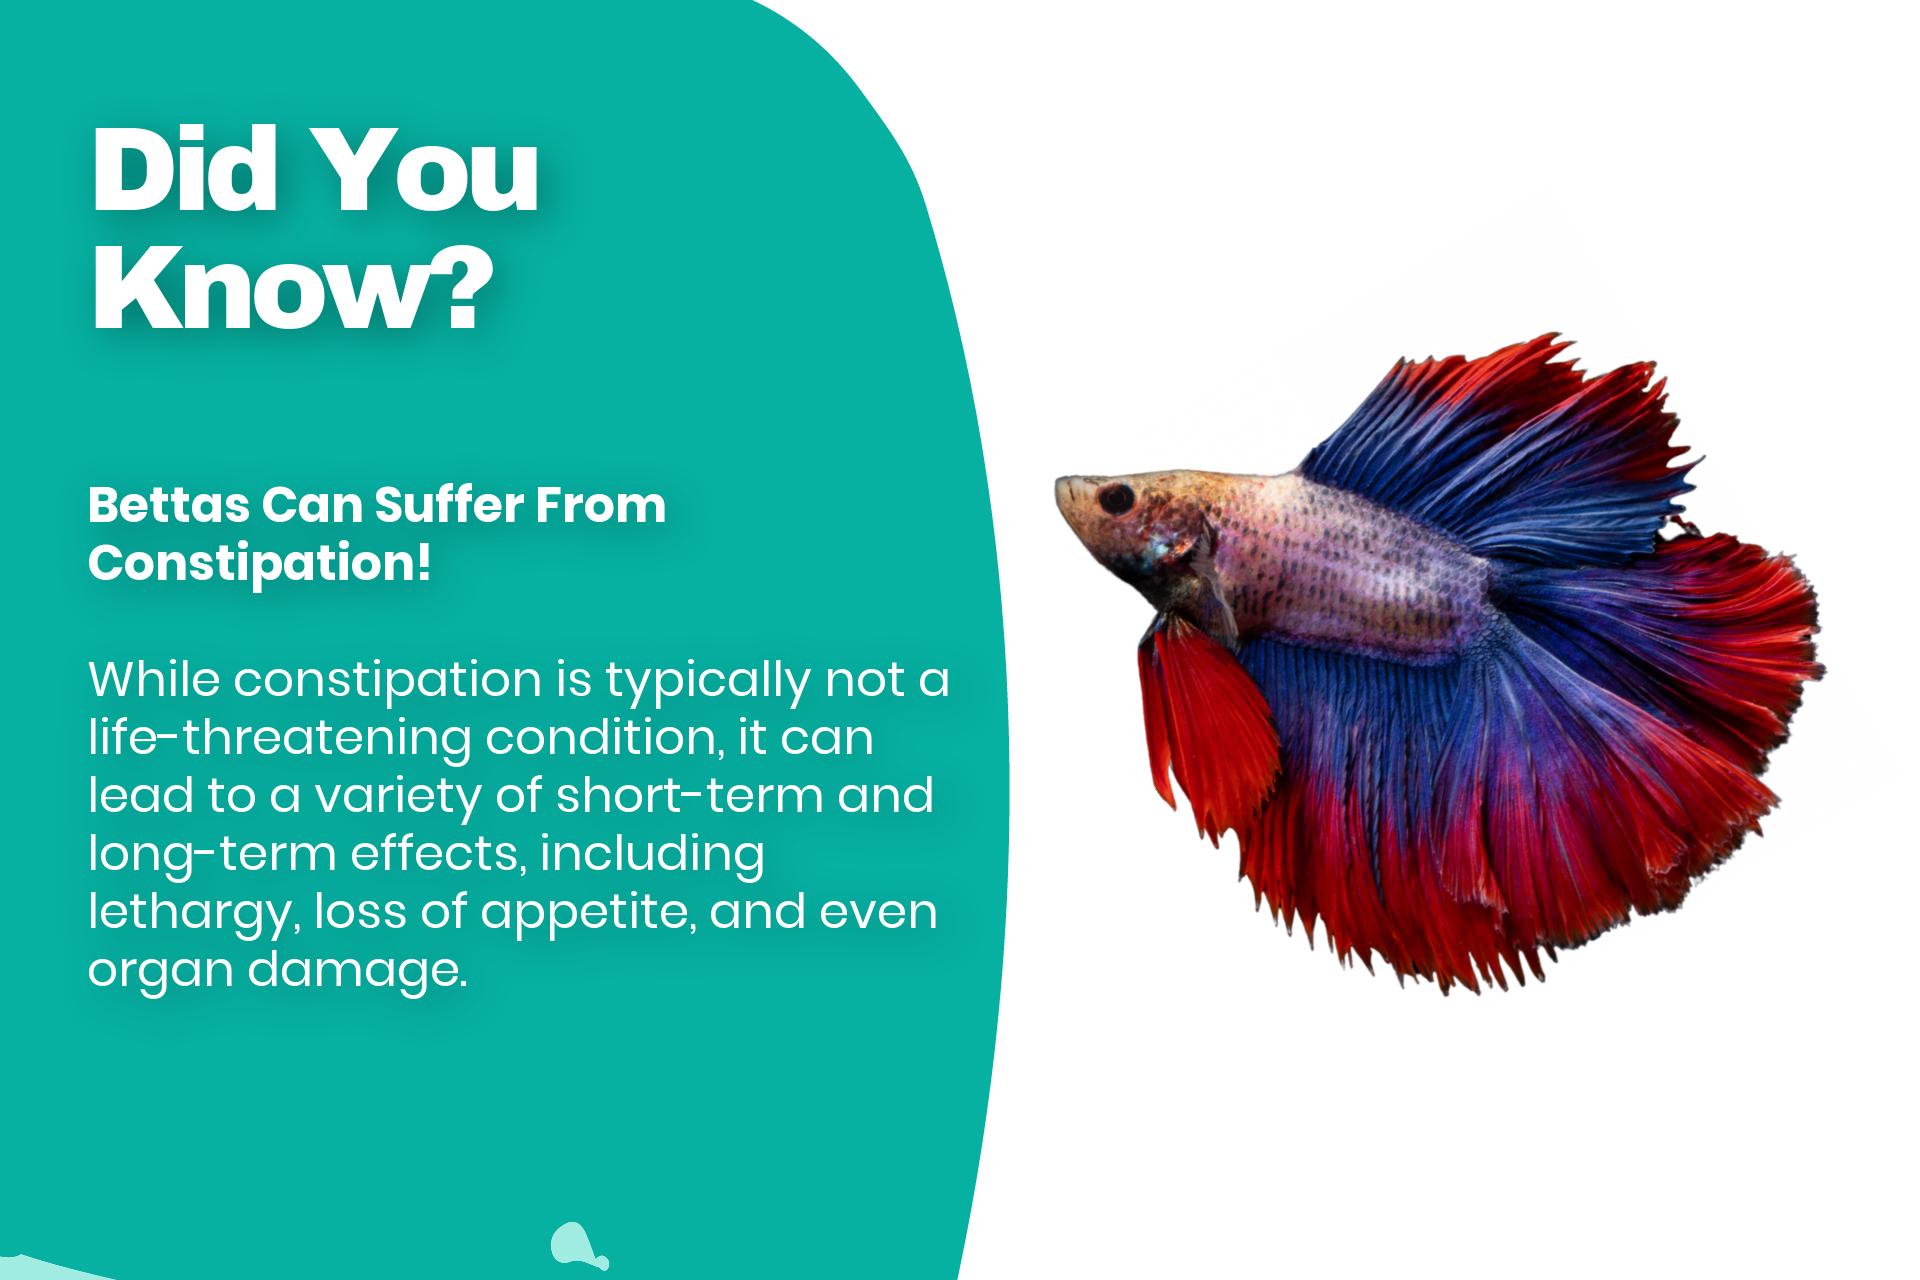 Bettas Can Suffer From Constipation